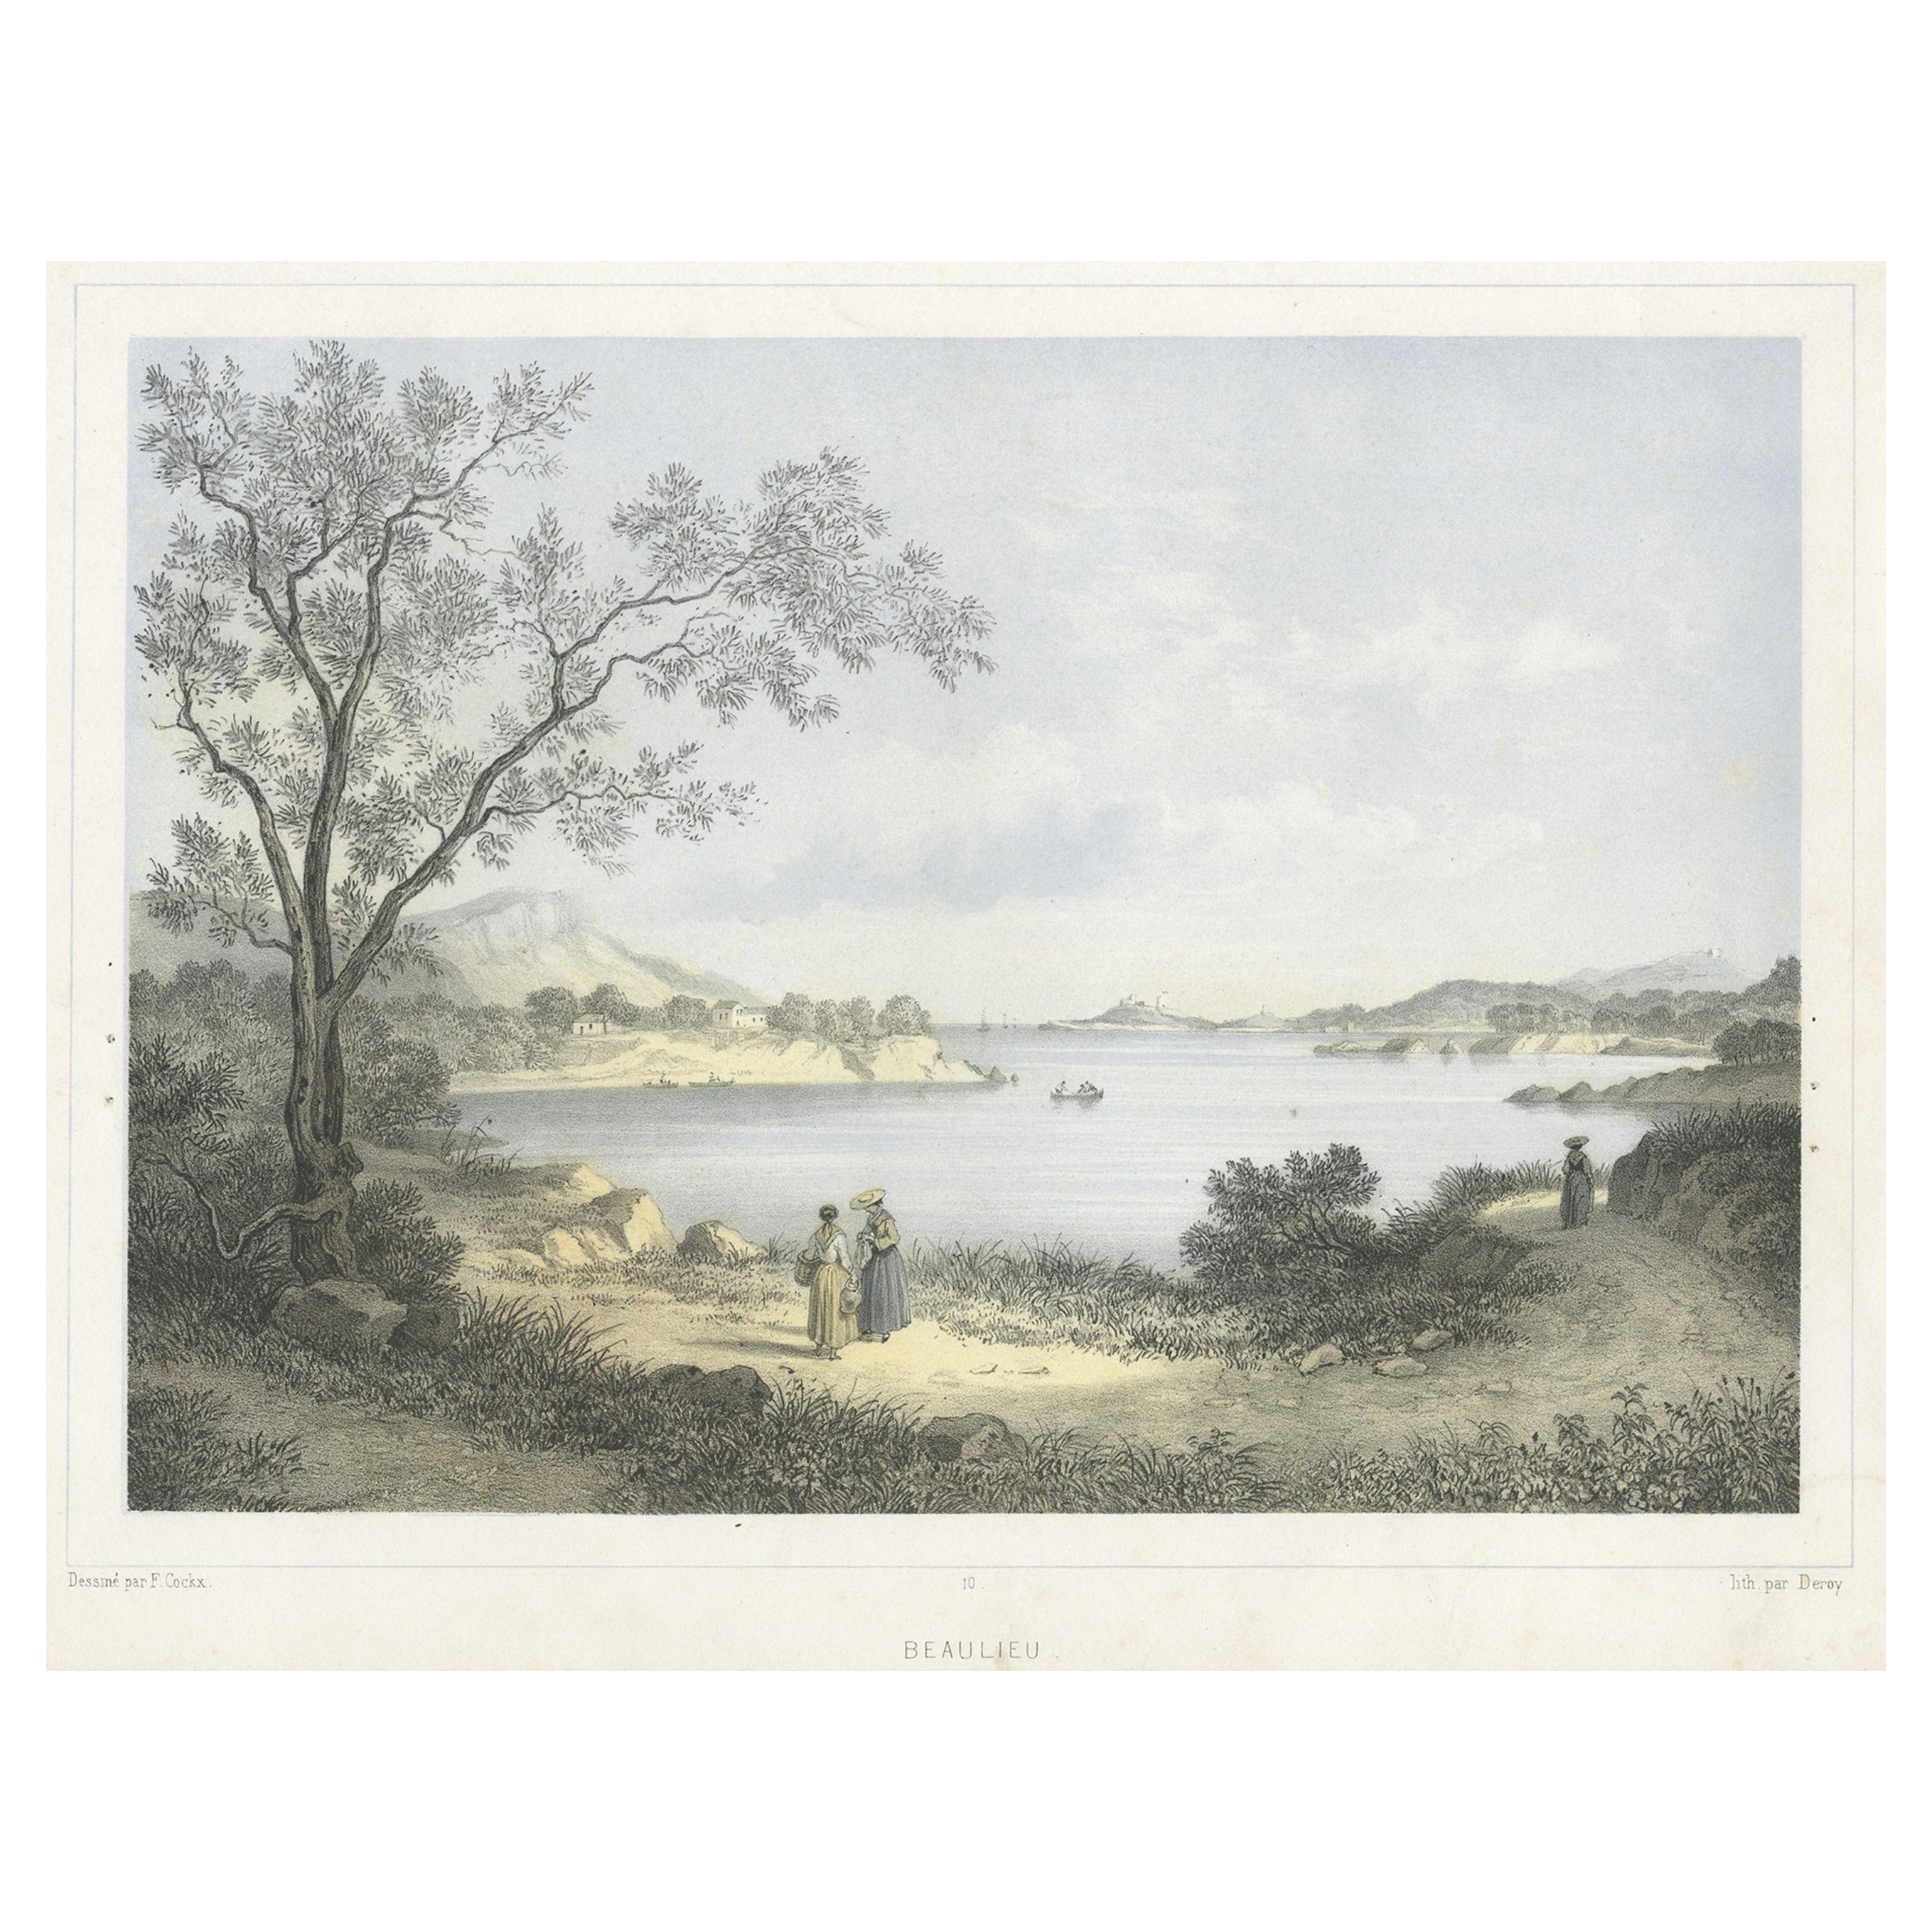 Print of Beaulieu-sur-mer, on the French Riviera Between Nice and Monaco, C.1850